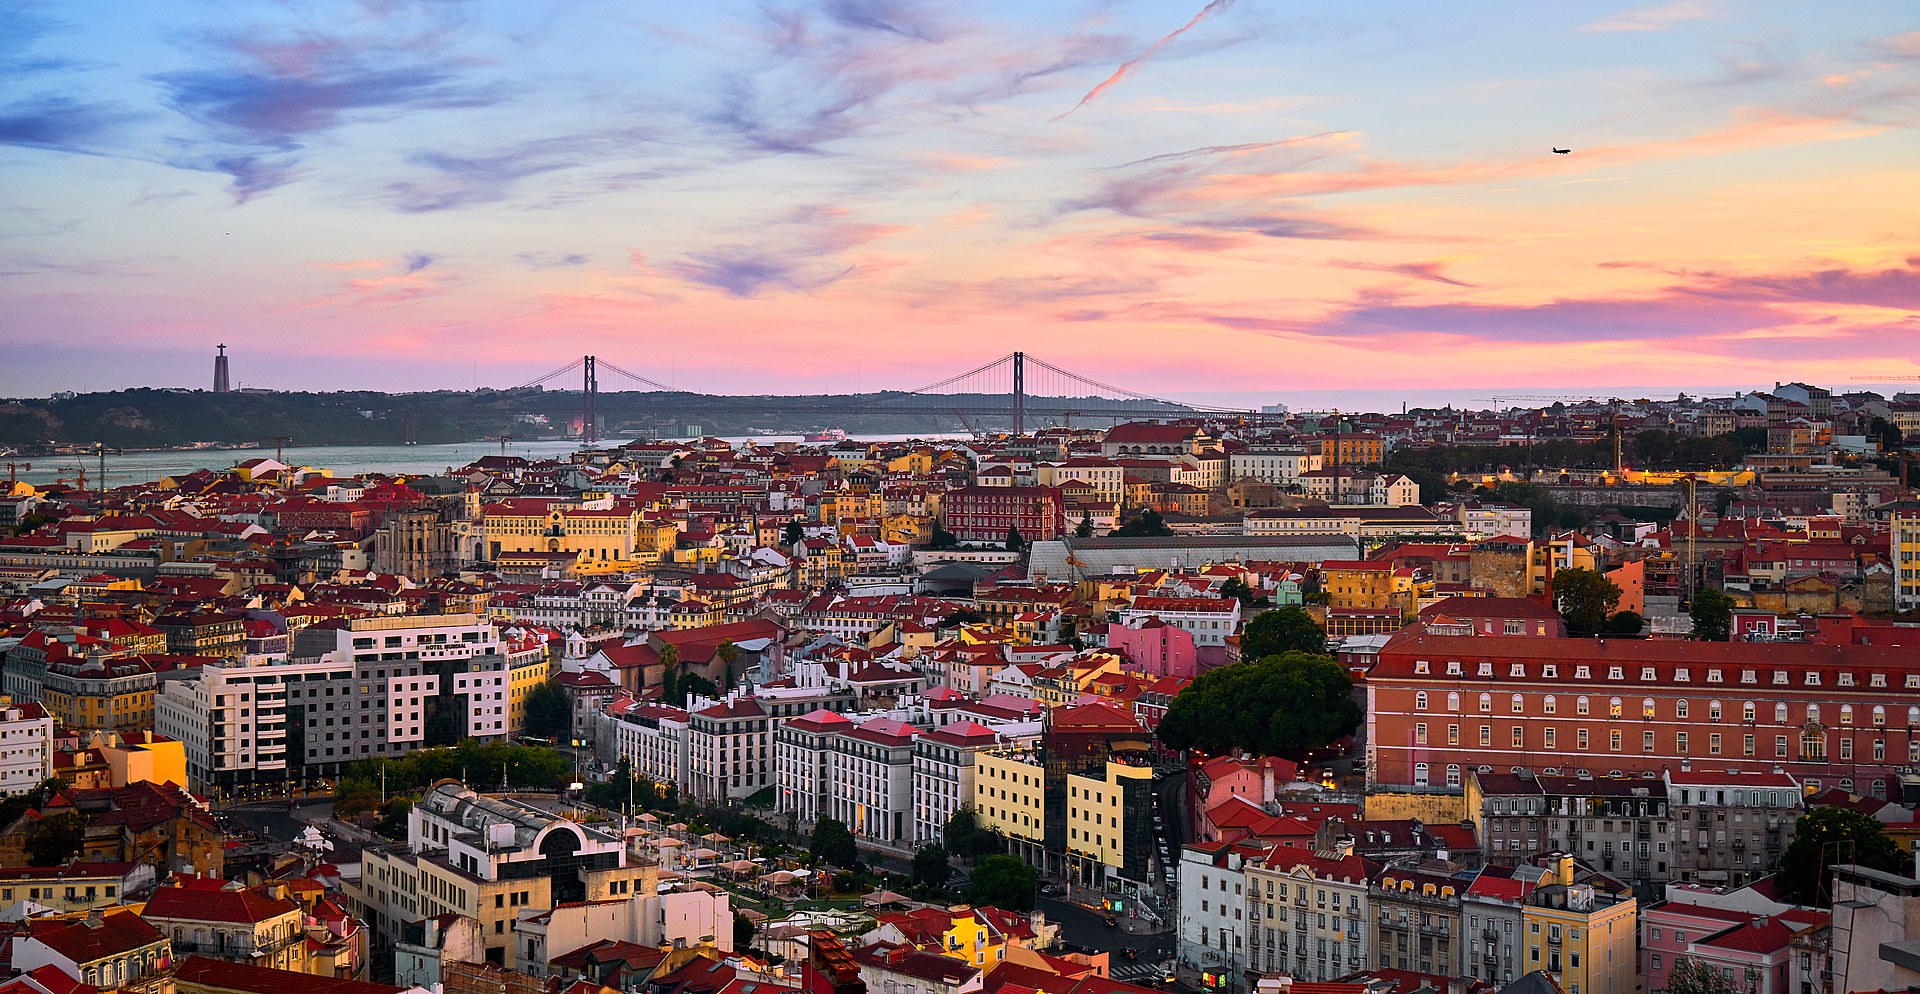 A photograph of Lisbon's landscape, with the 25 de Abril bridge and the river Tagus in the background.